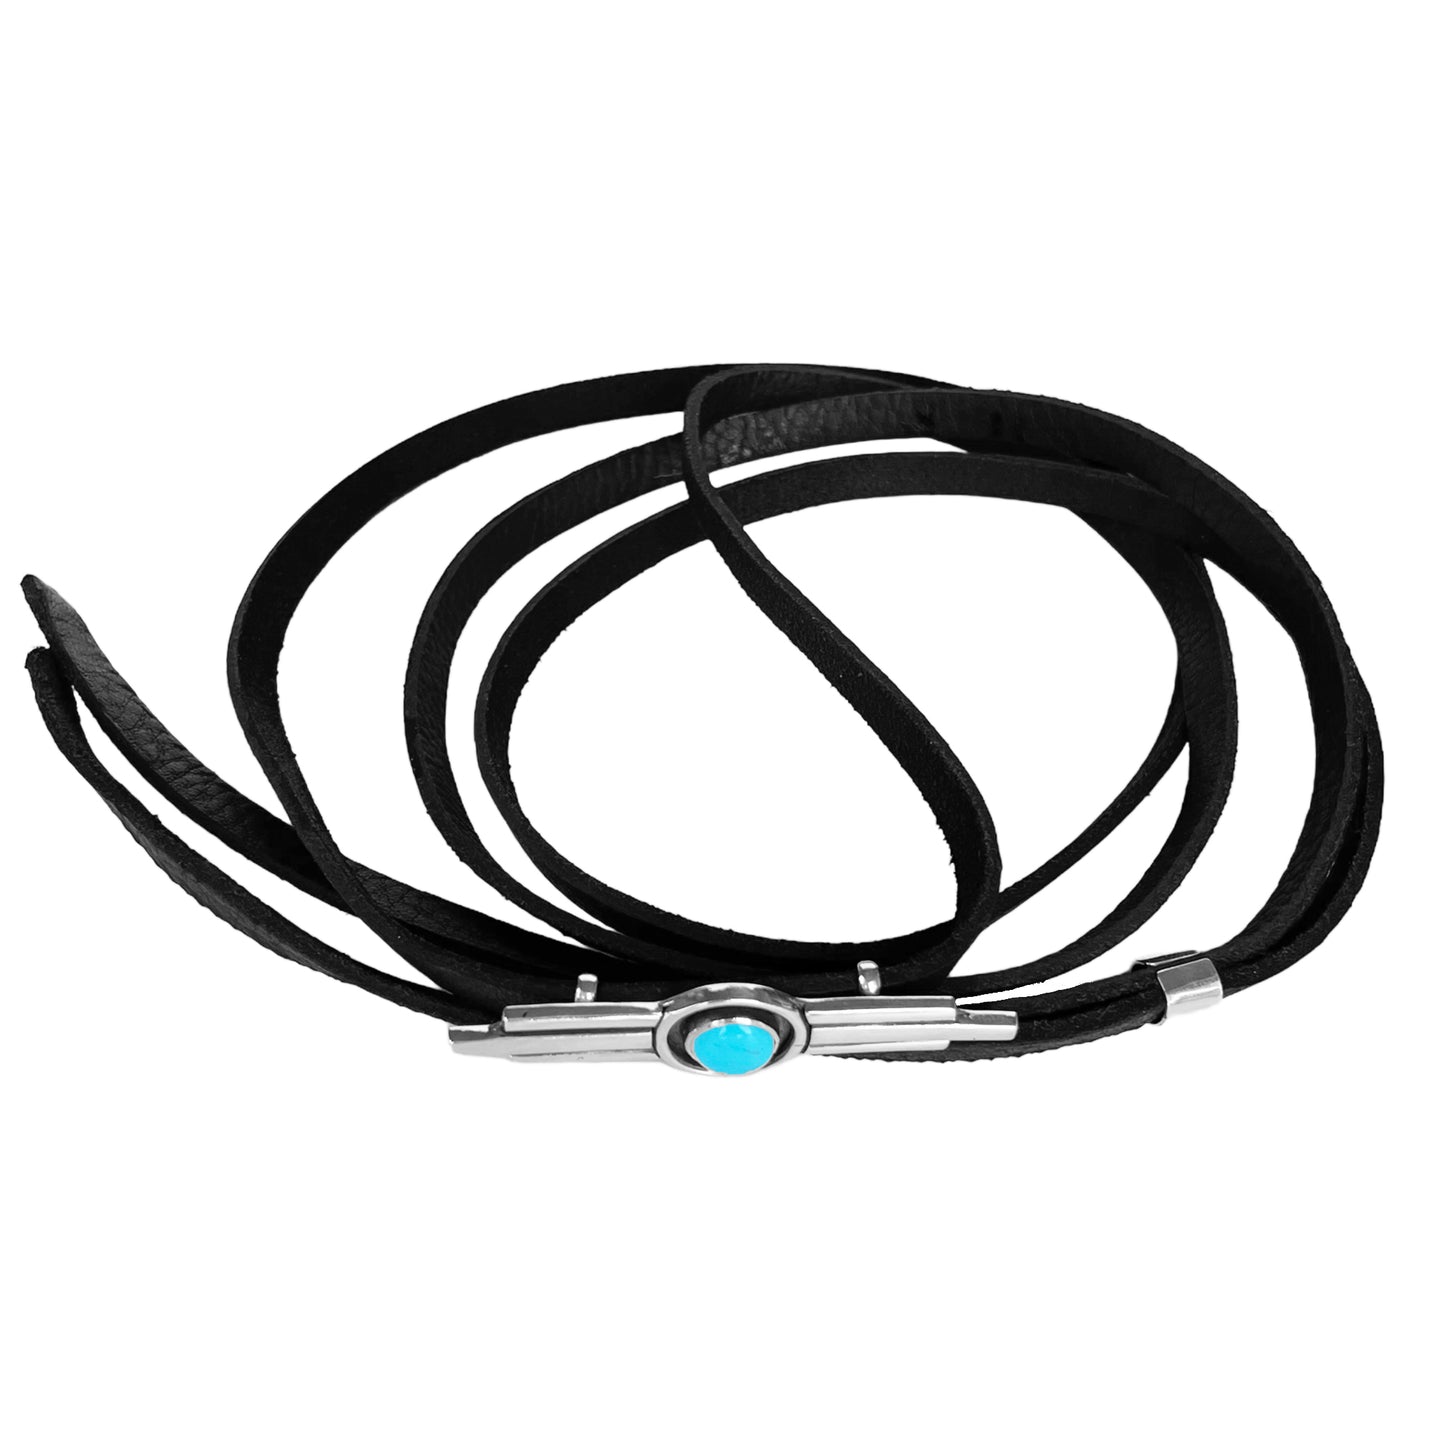 Thin black leather hat band featuring a sterling silver hat pin with 3 bar design with the middle bar slightly longer than the 2 side bars. The middle contains a round turquoise stone encircled with a black patina.